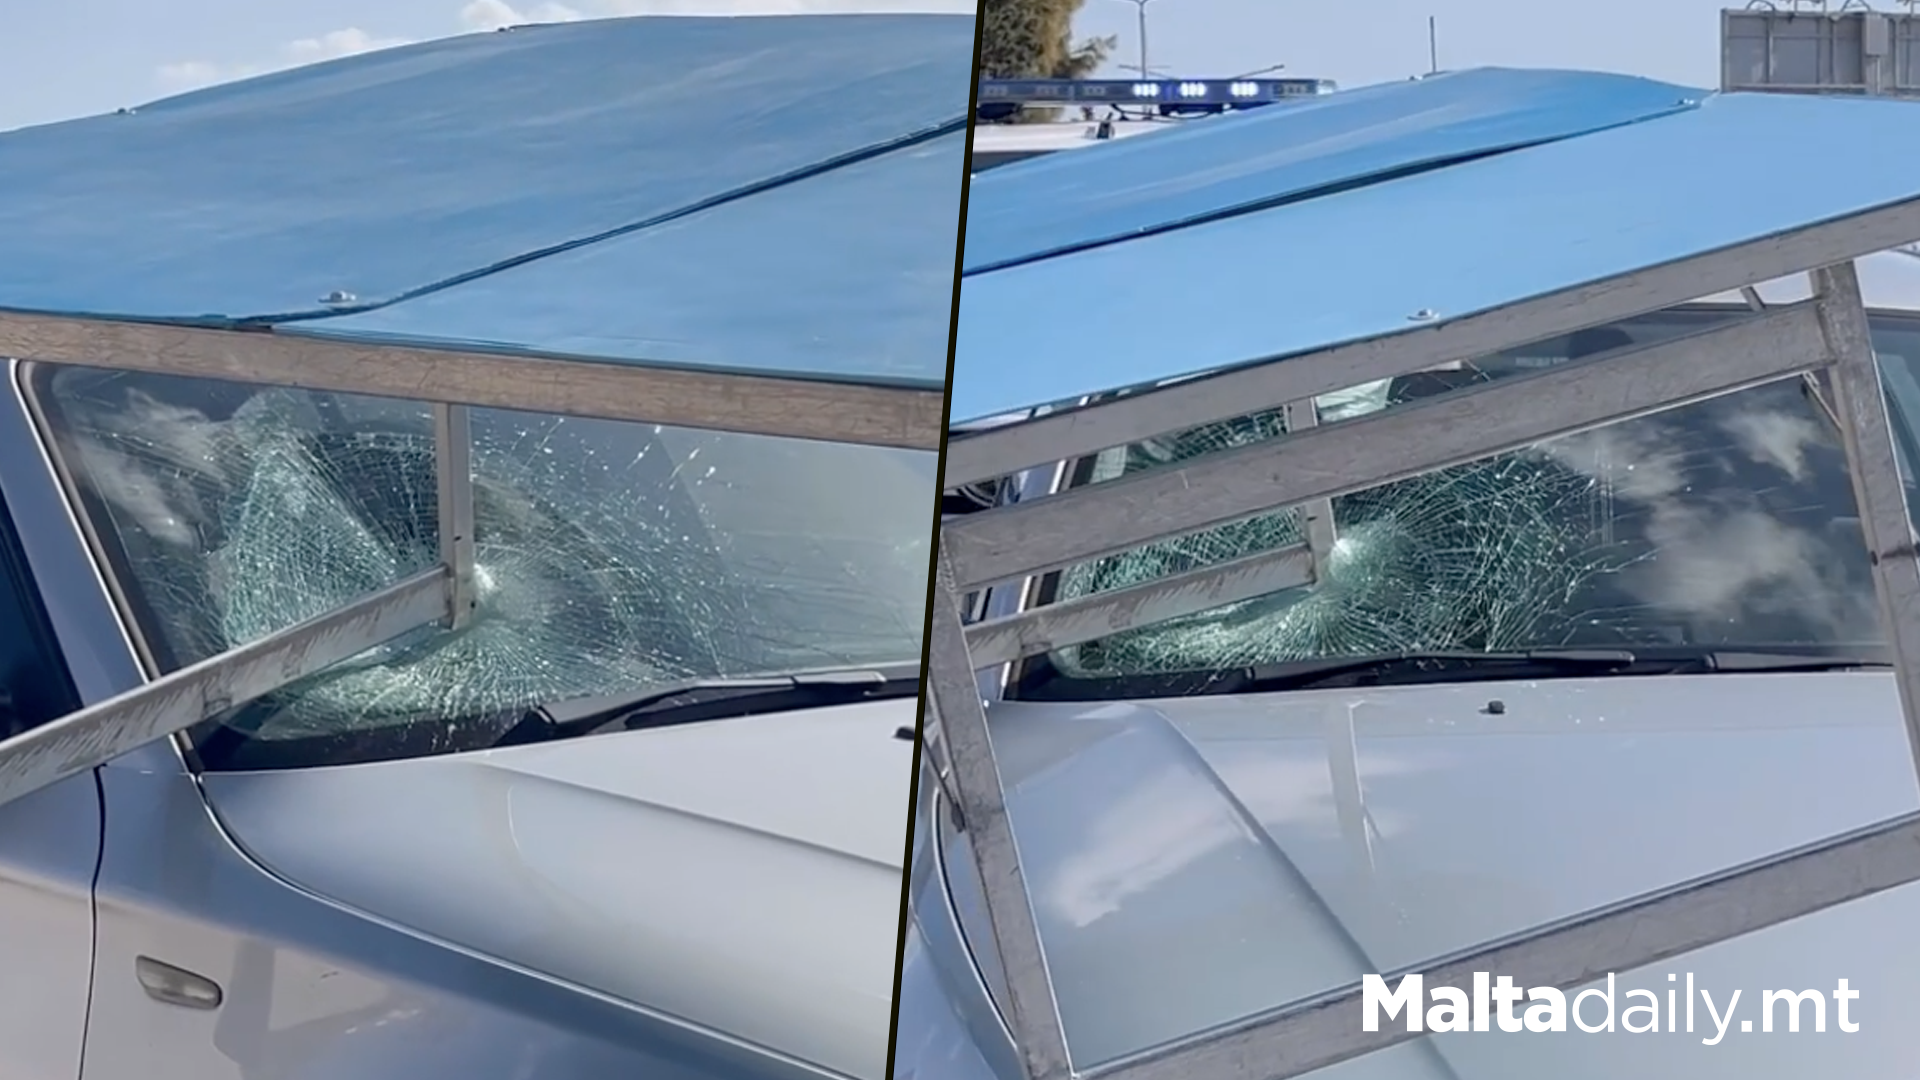 Table Crashes Into Car Windshield In Mrieħel Accident